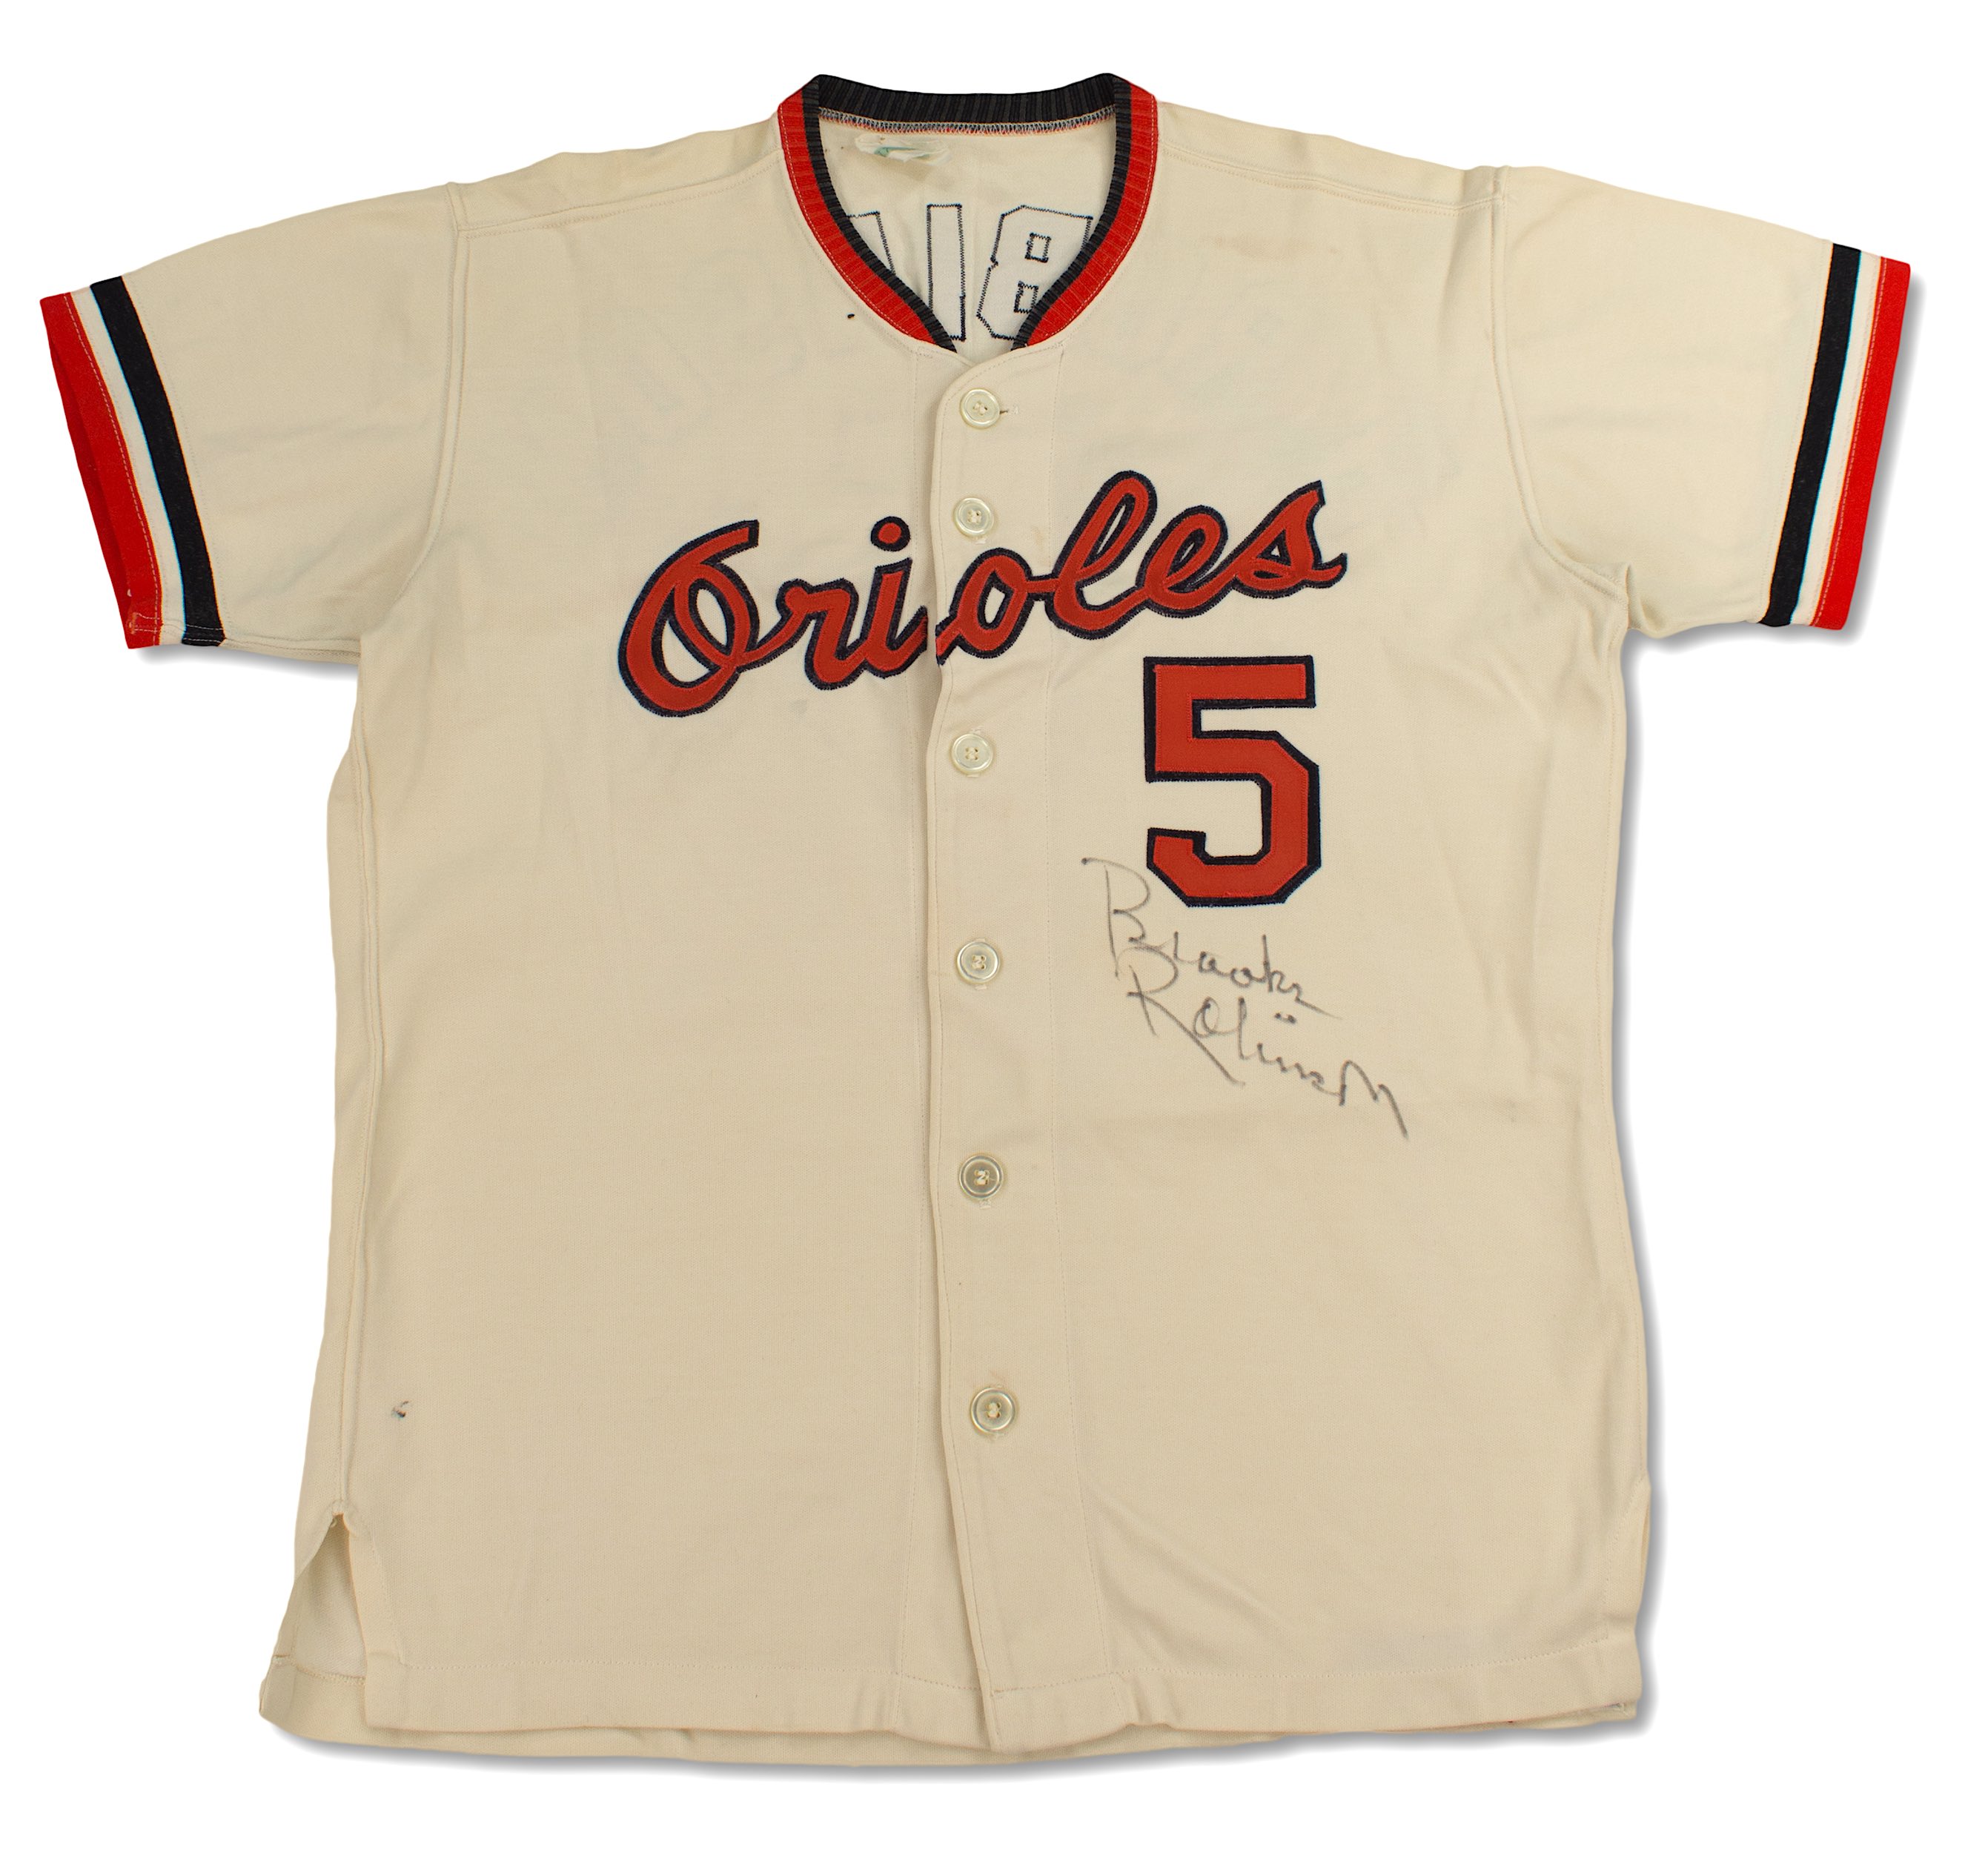 Brooks Robinson Jersey - Baltimore Orioles 1971 Cooperstown Throwback  Baseball Jersey